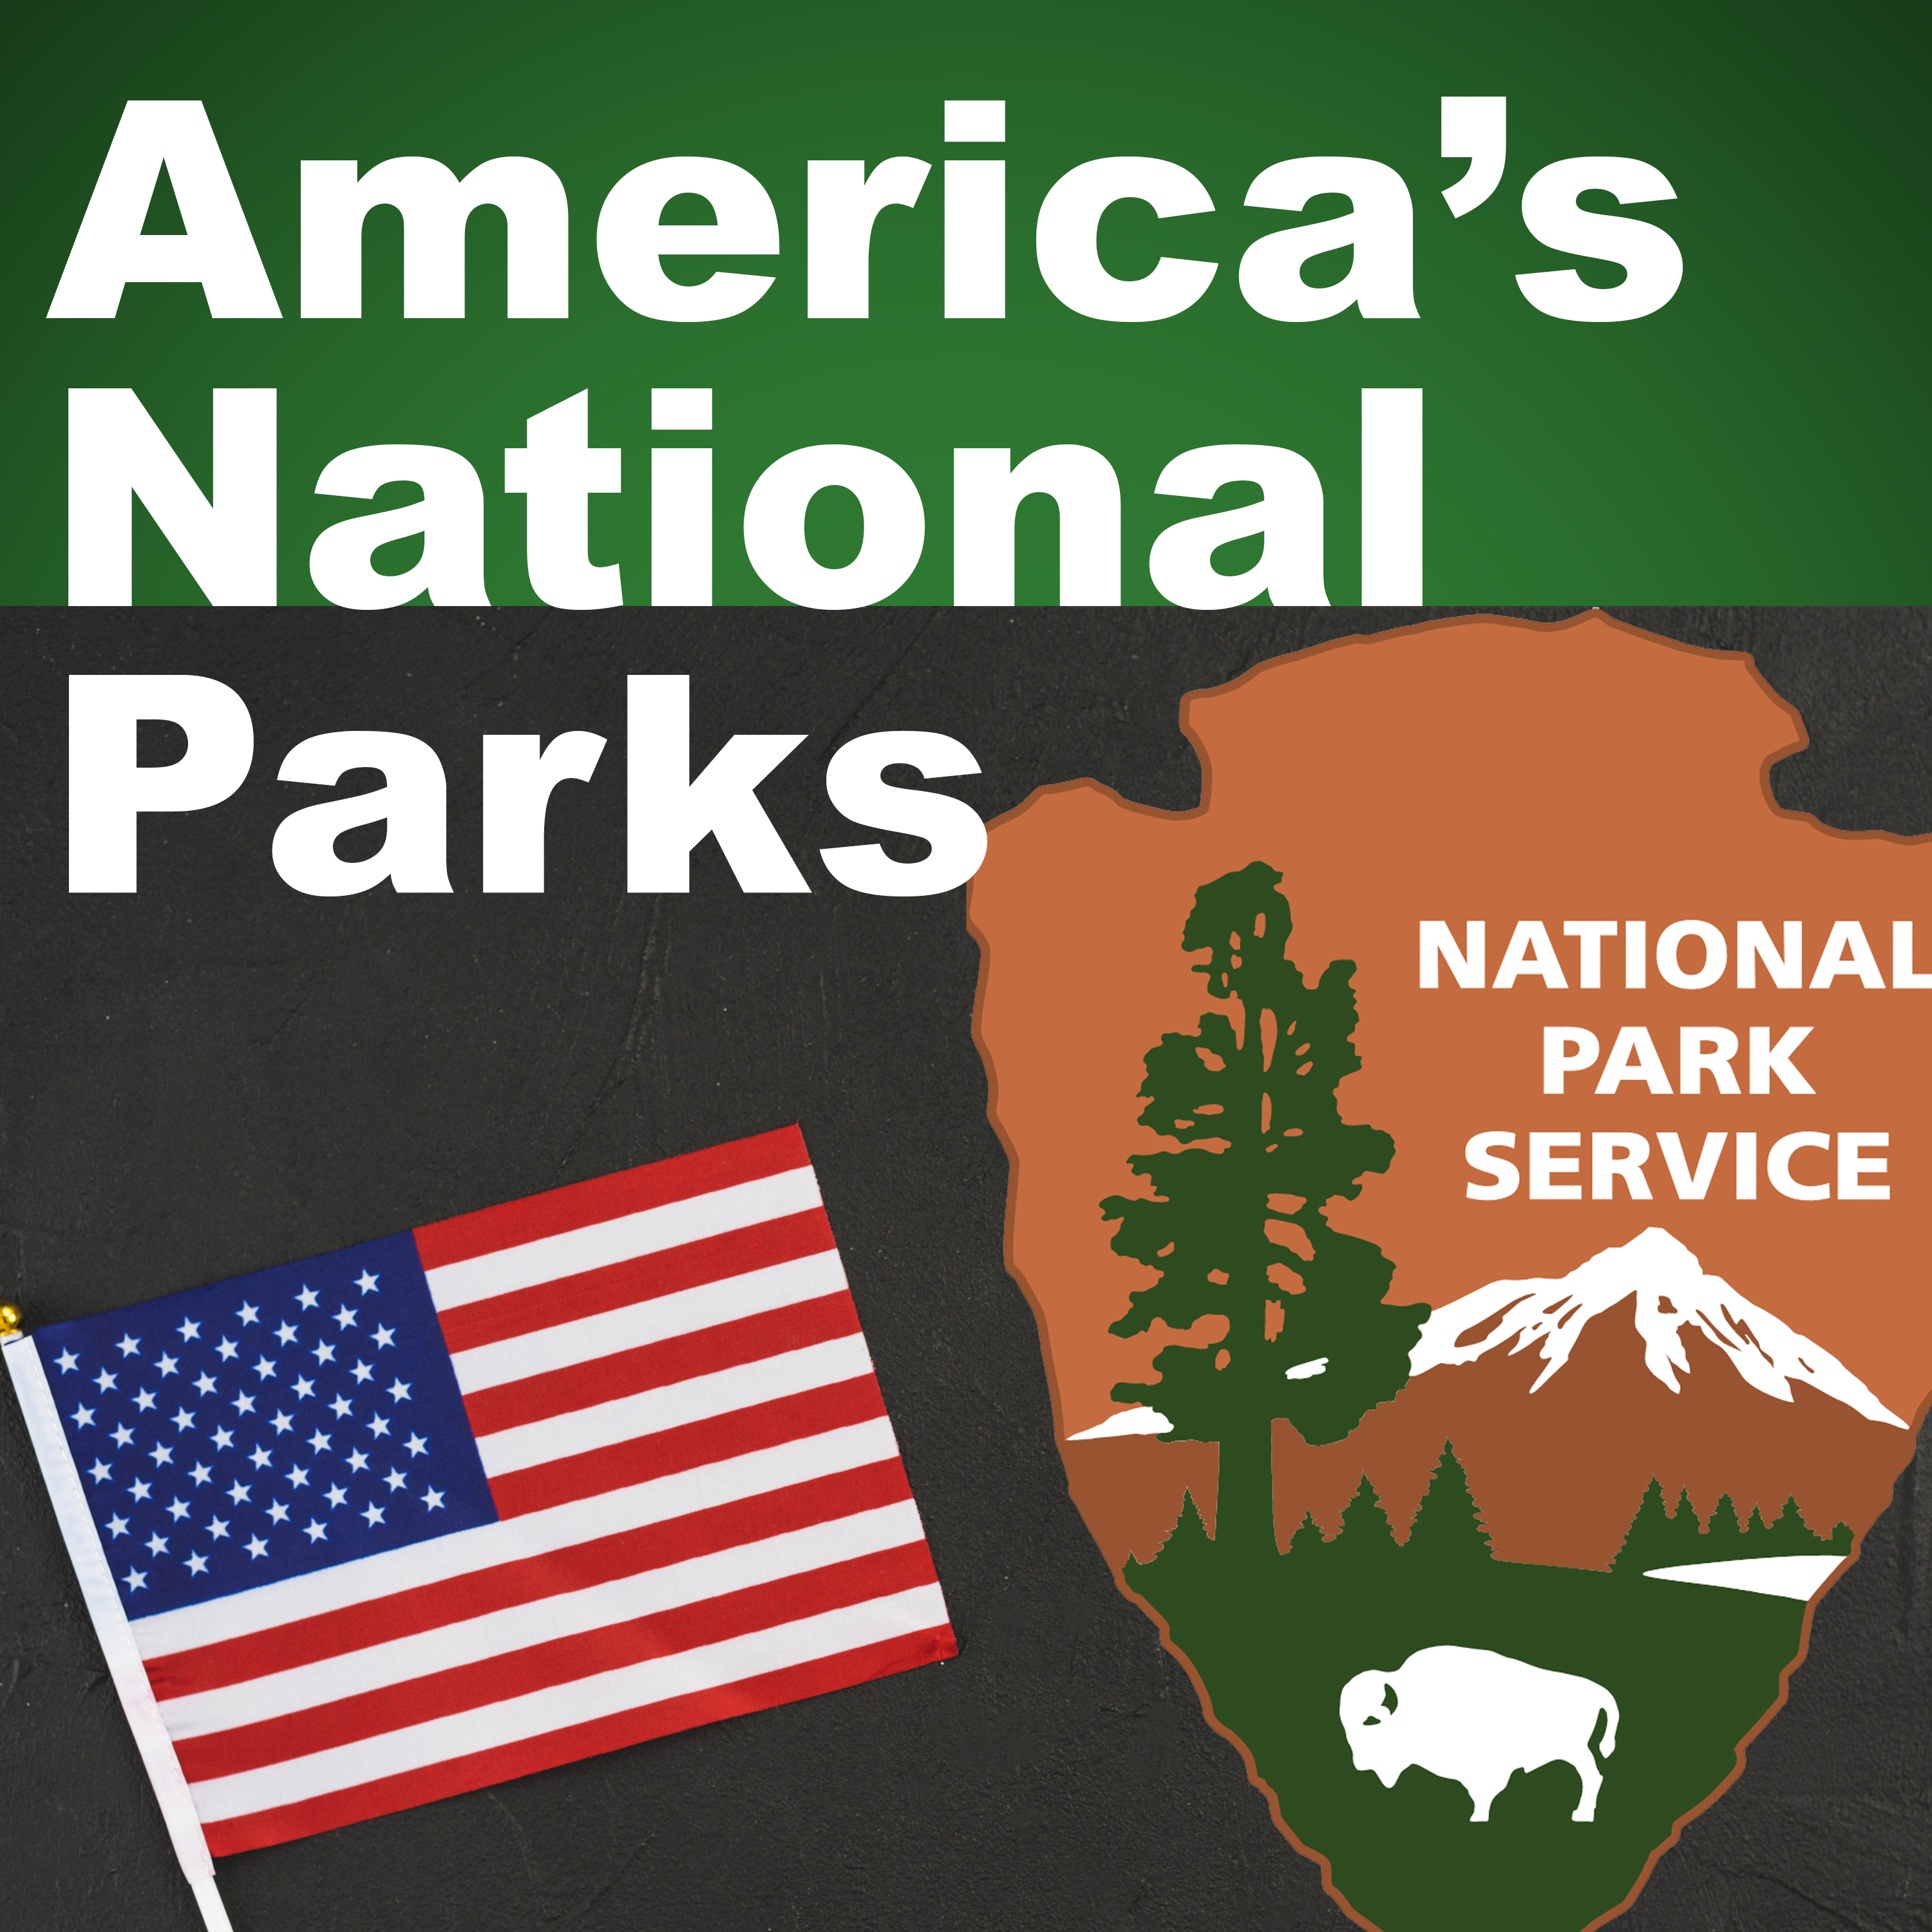 America's National Parks - VOA Learning English